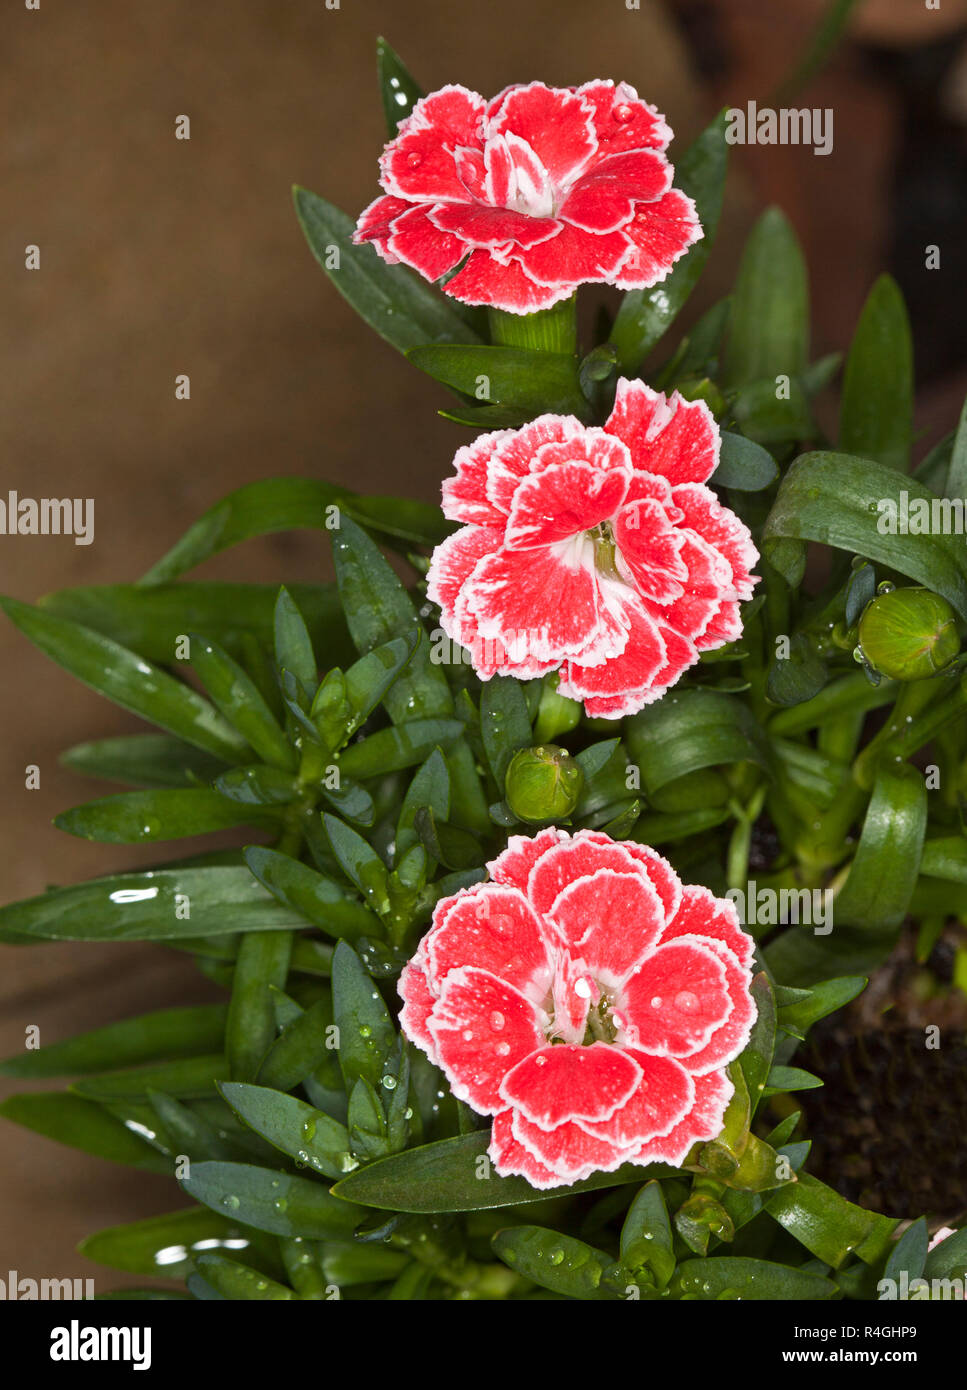 How to grow graceful and beautiful Carnations